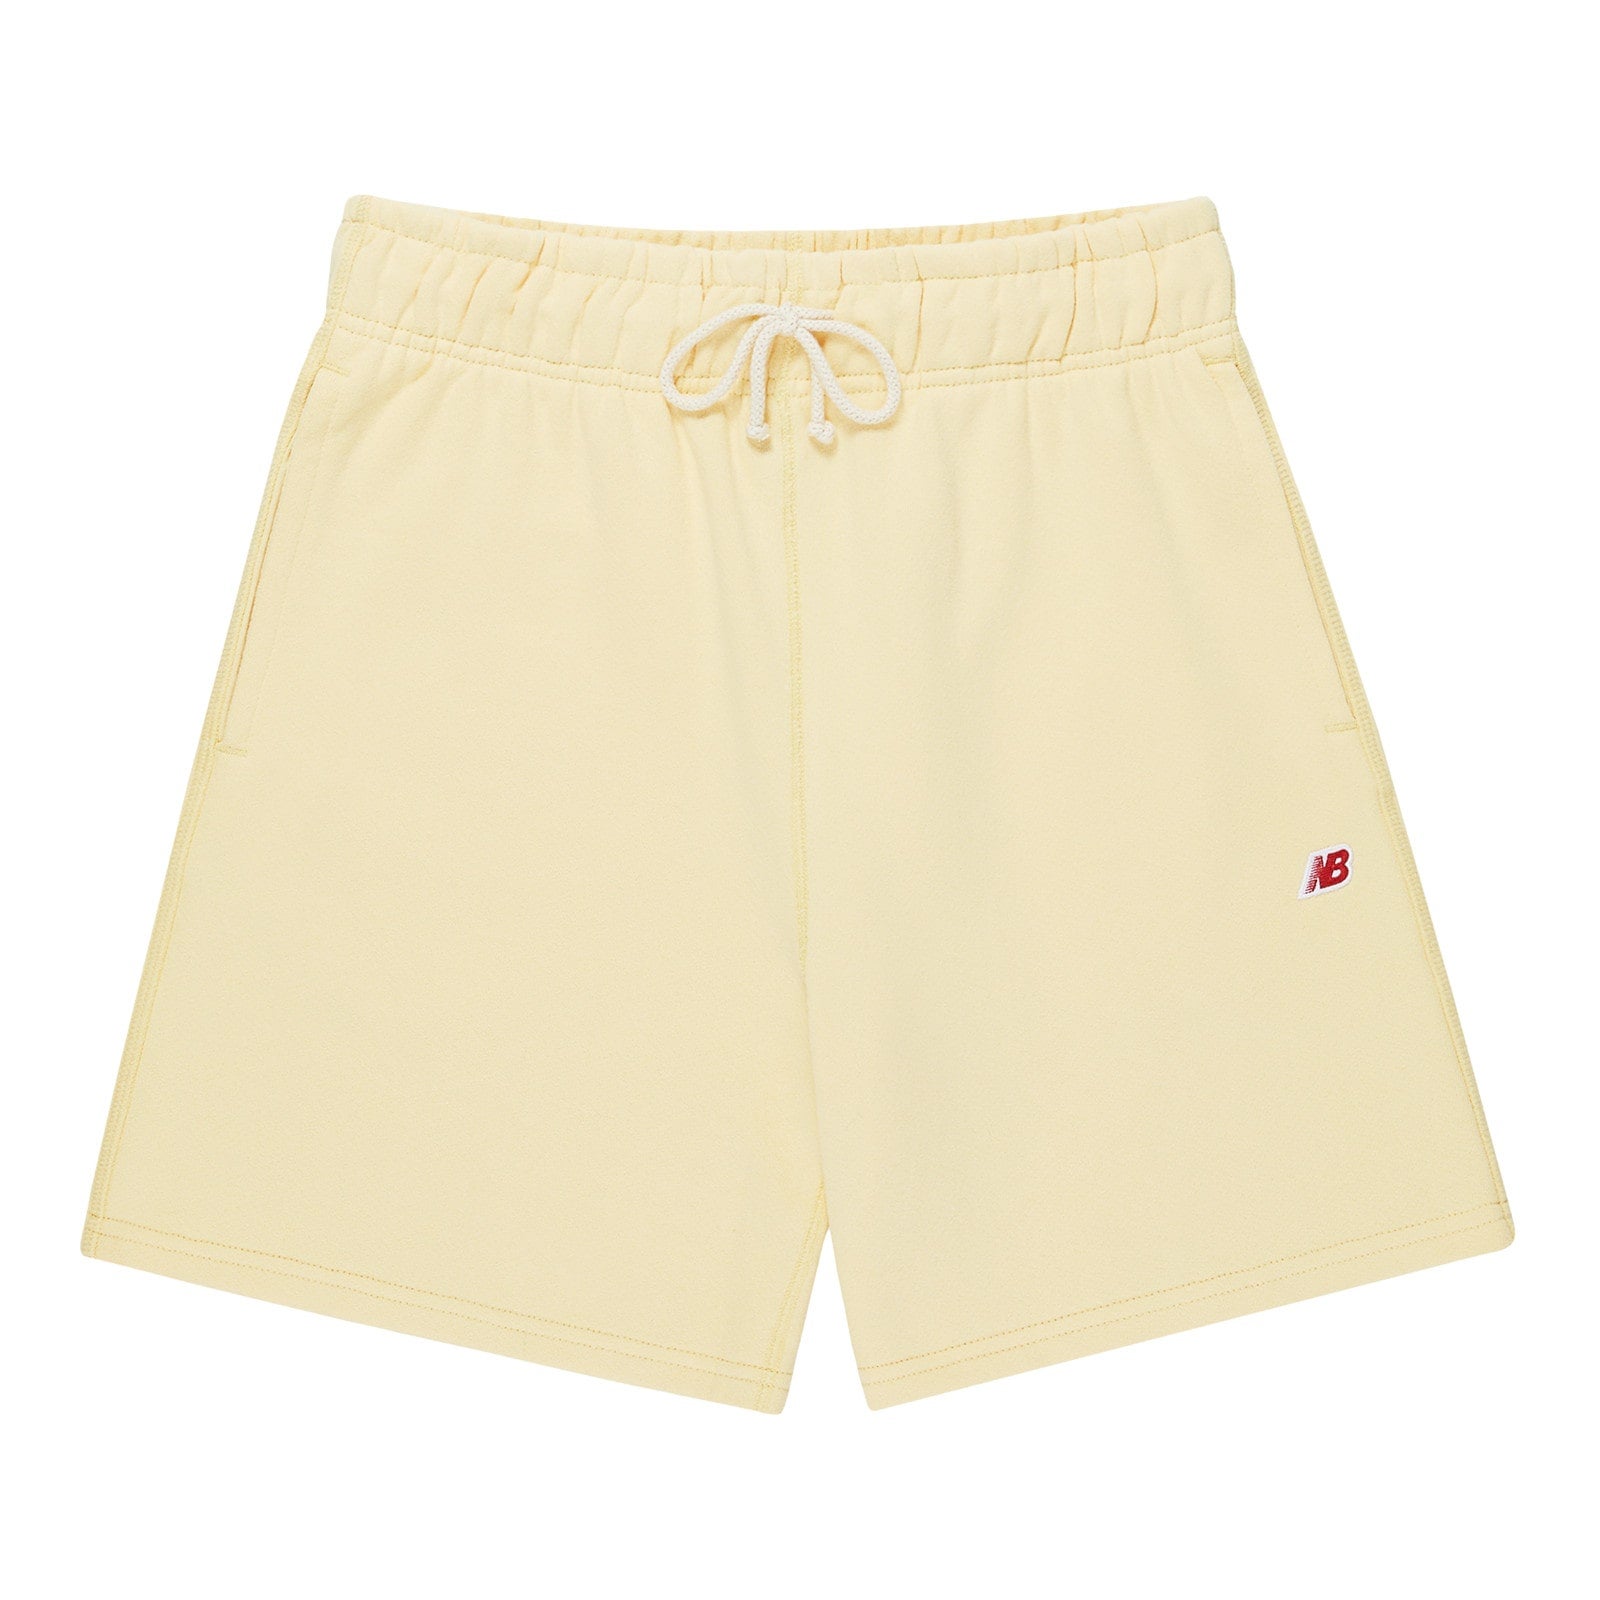 MADE in USA Core Short